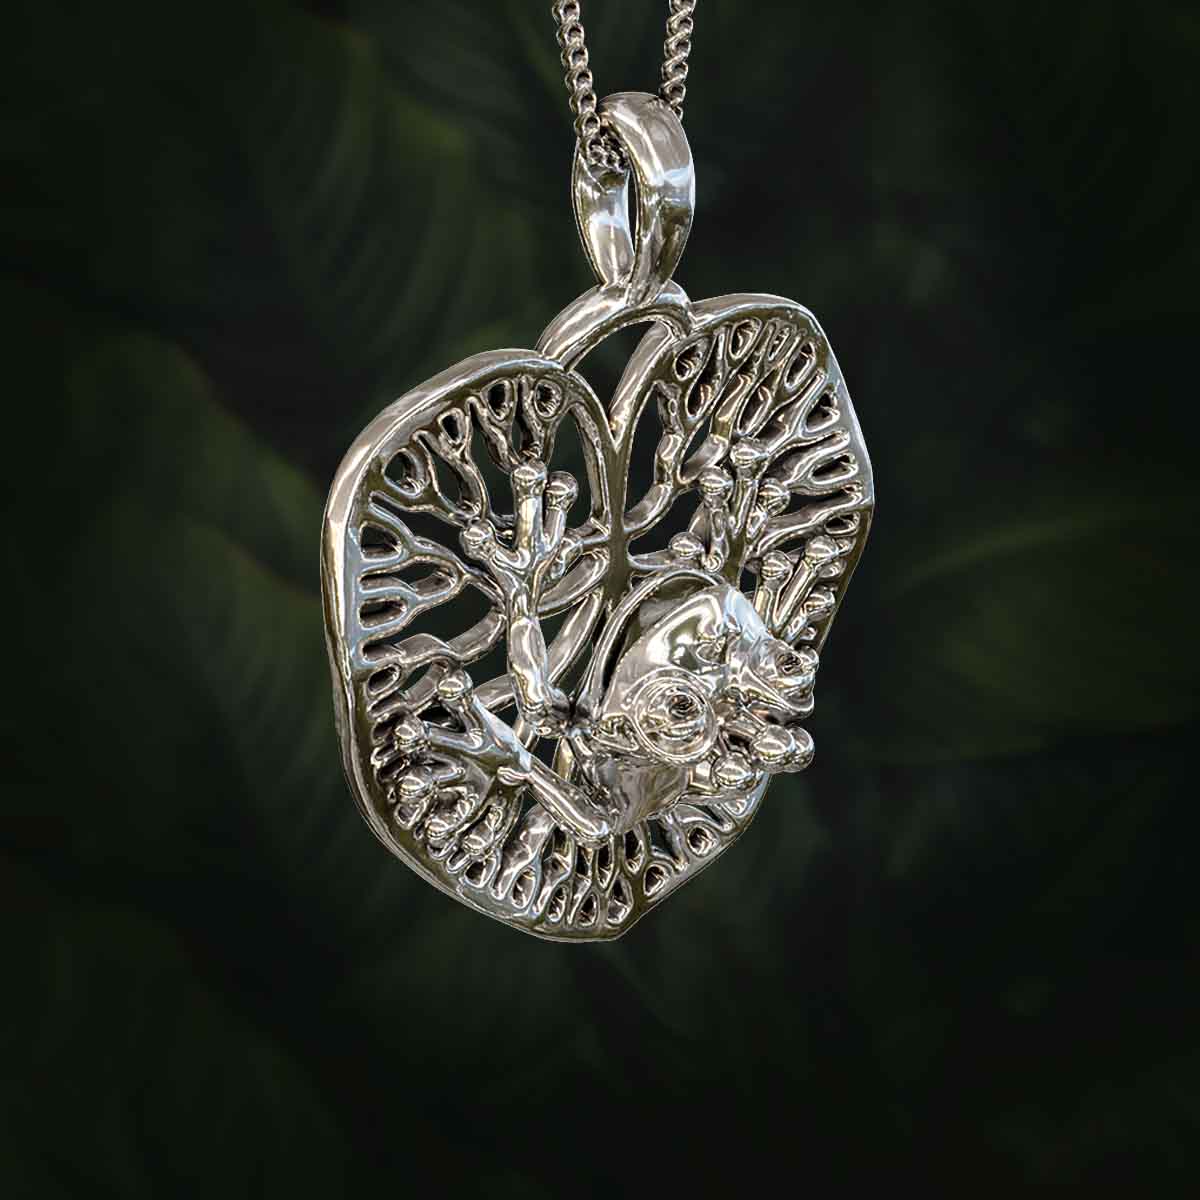 Main-Image-White-Gold-Rhodium-Finish-Frog-Prince-Sits-on-a-Lilypad-Pendant-Jewelry-For-Necklace